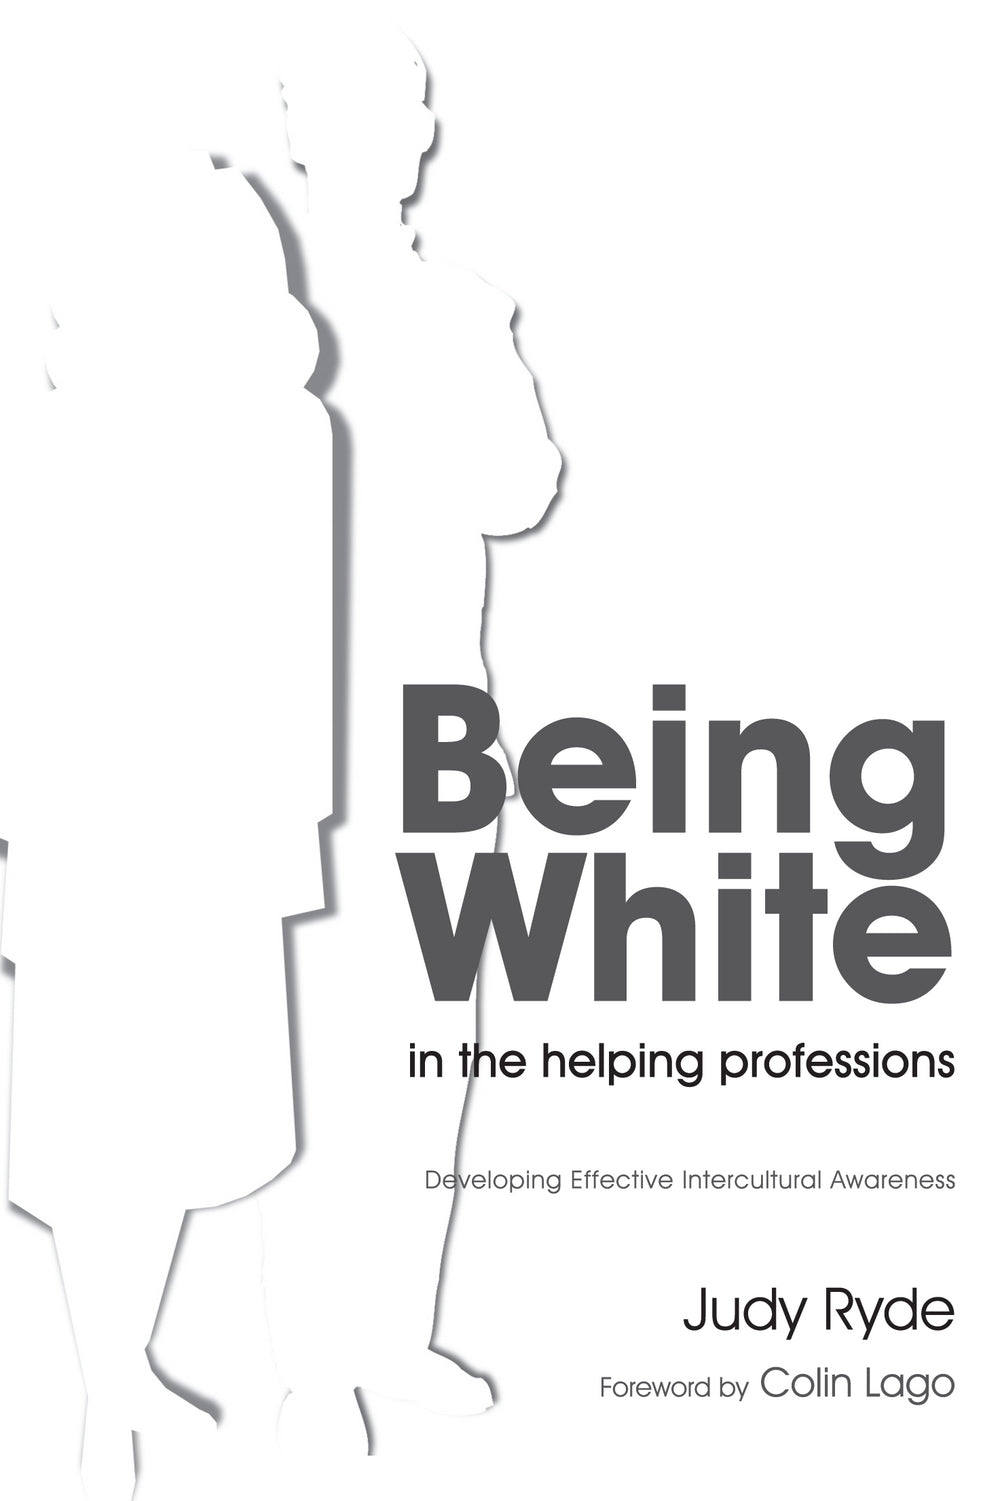 Being White in the Helping Professions by Judy Ryde